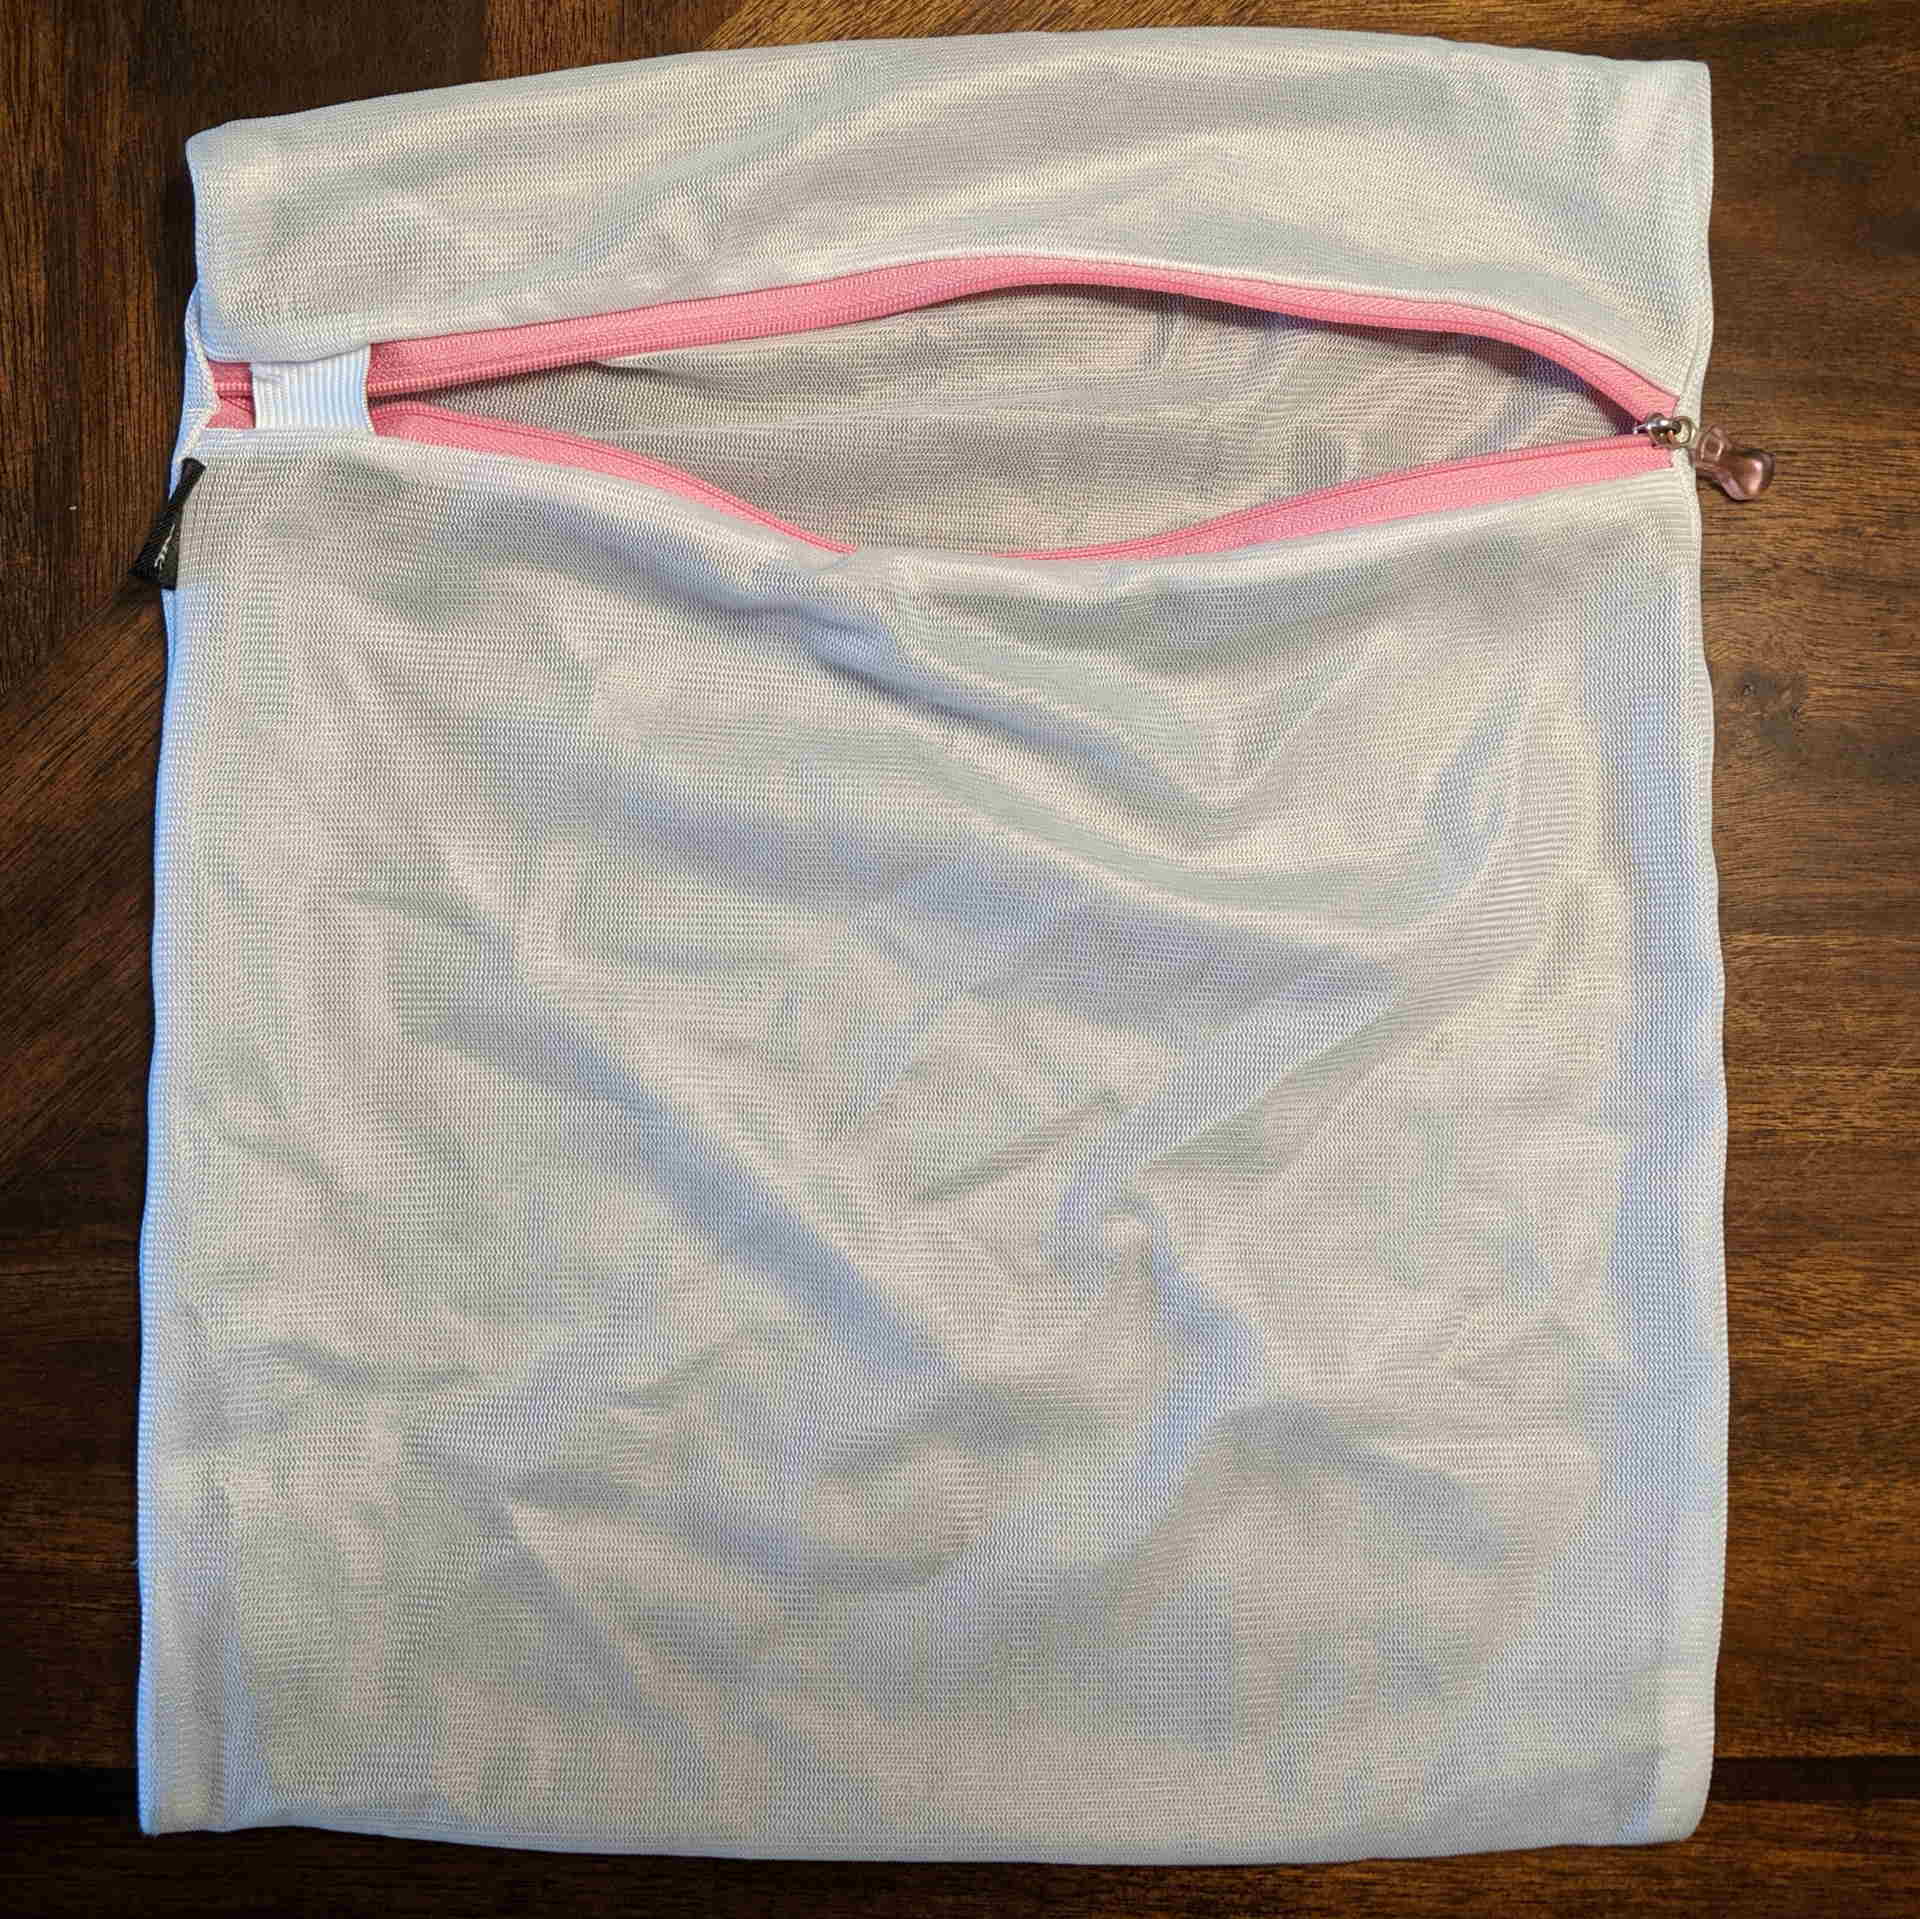 One of my favorite laundry hacks: An excellent mesh bag!